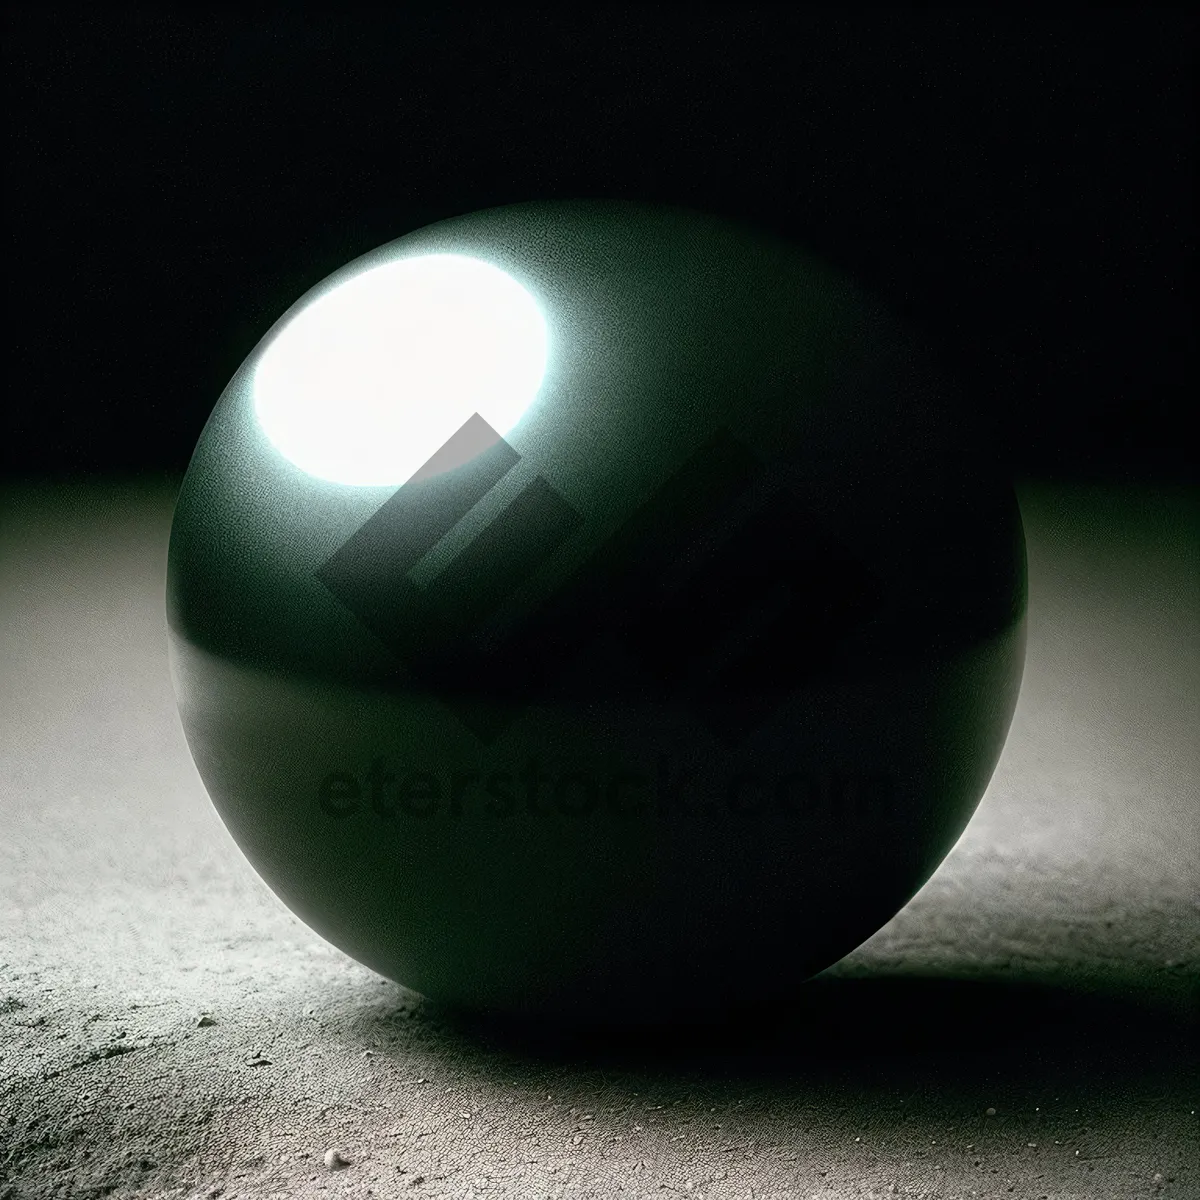 Picture of Egg on Pool Table with Lamp Lighting